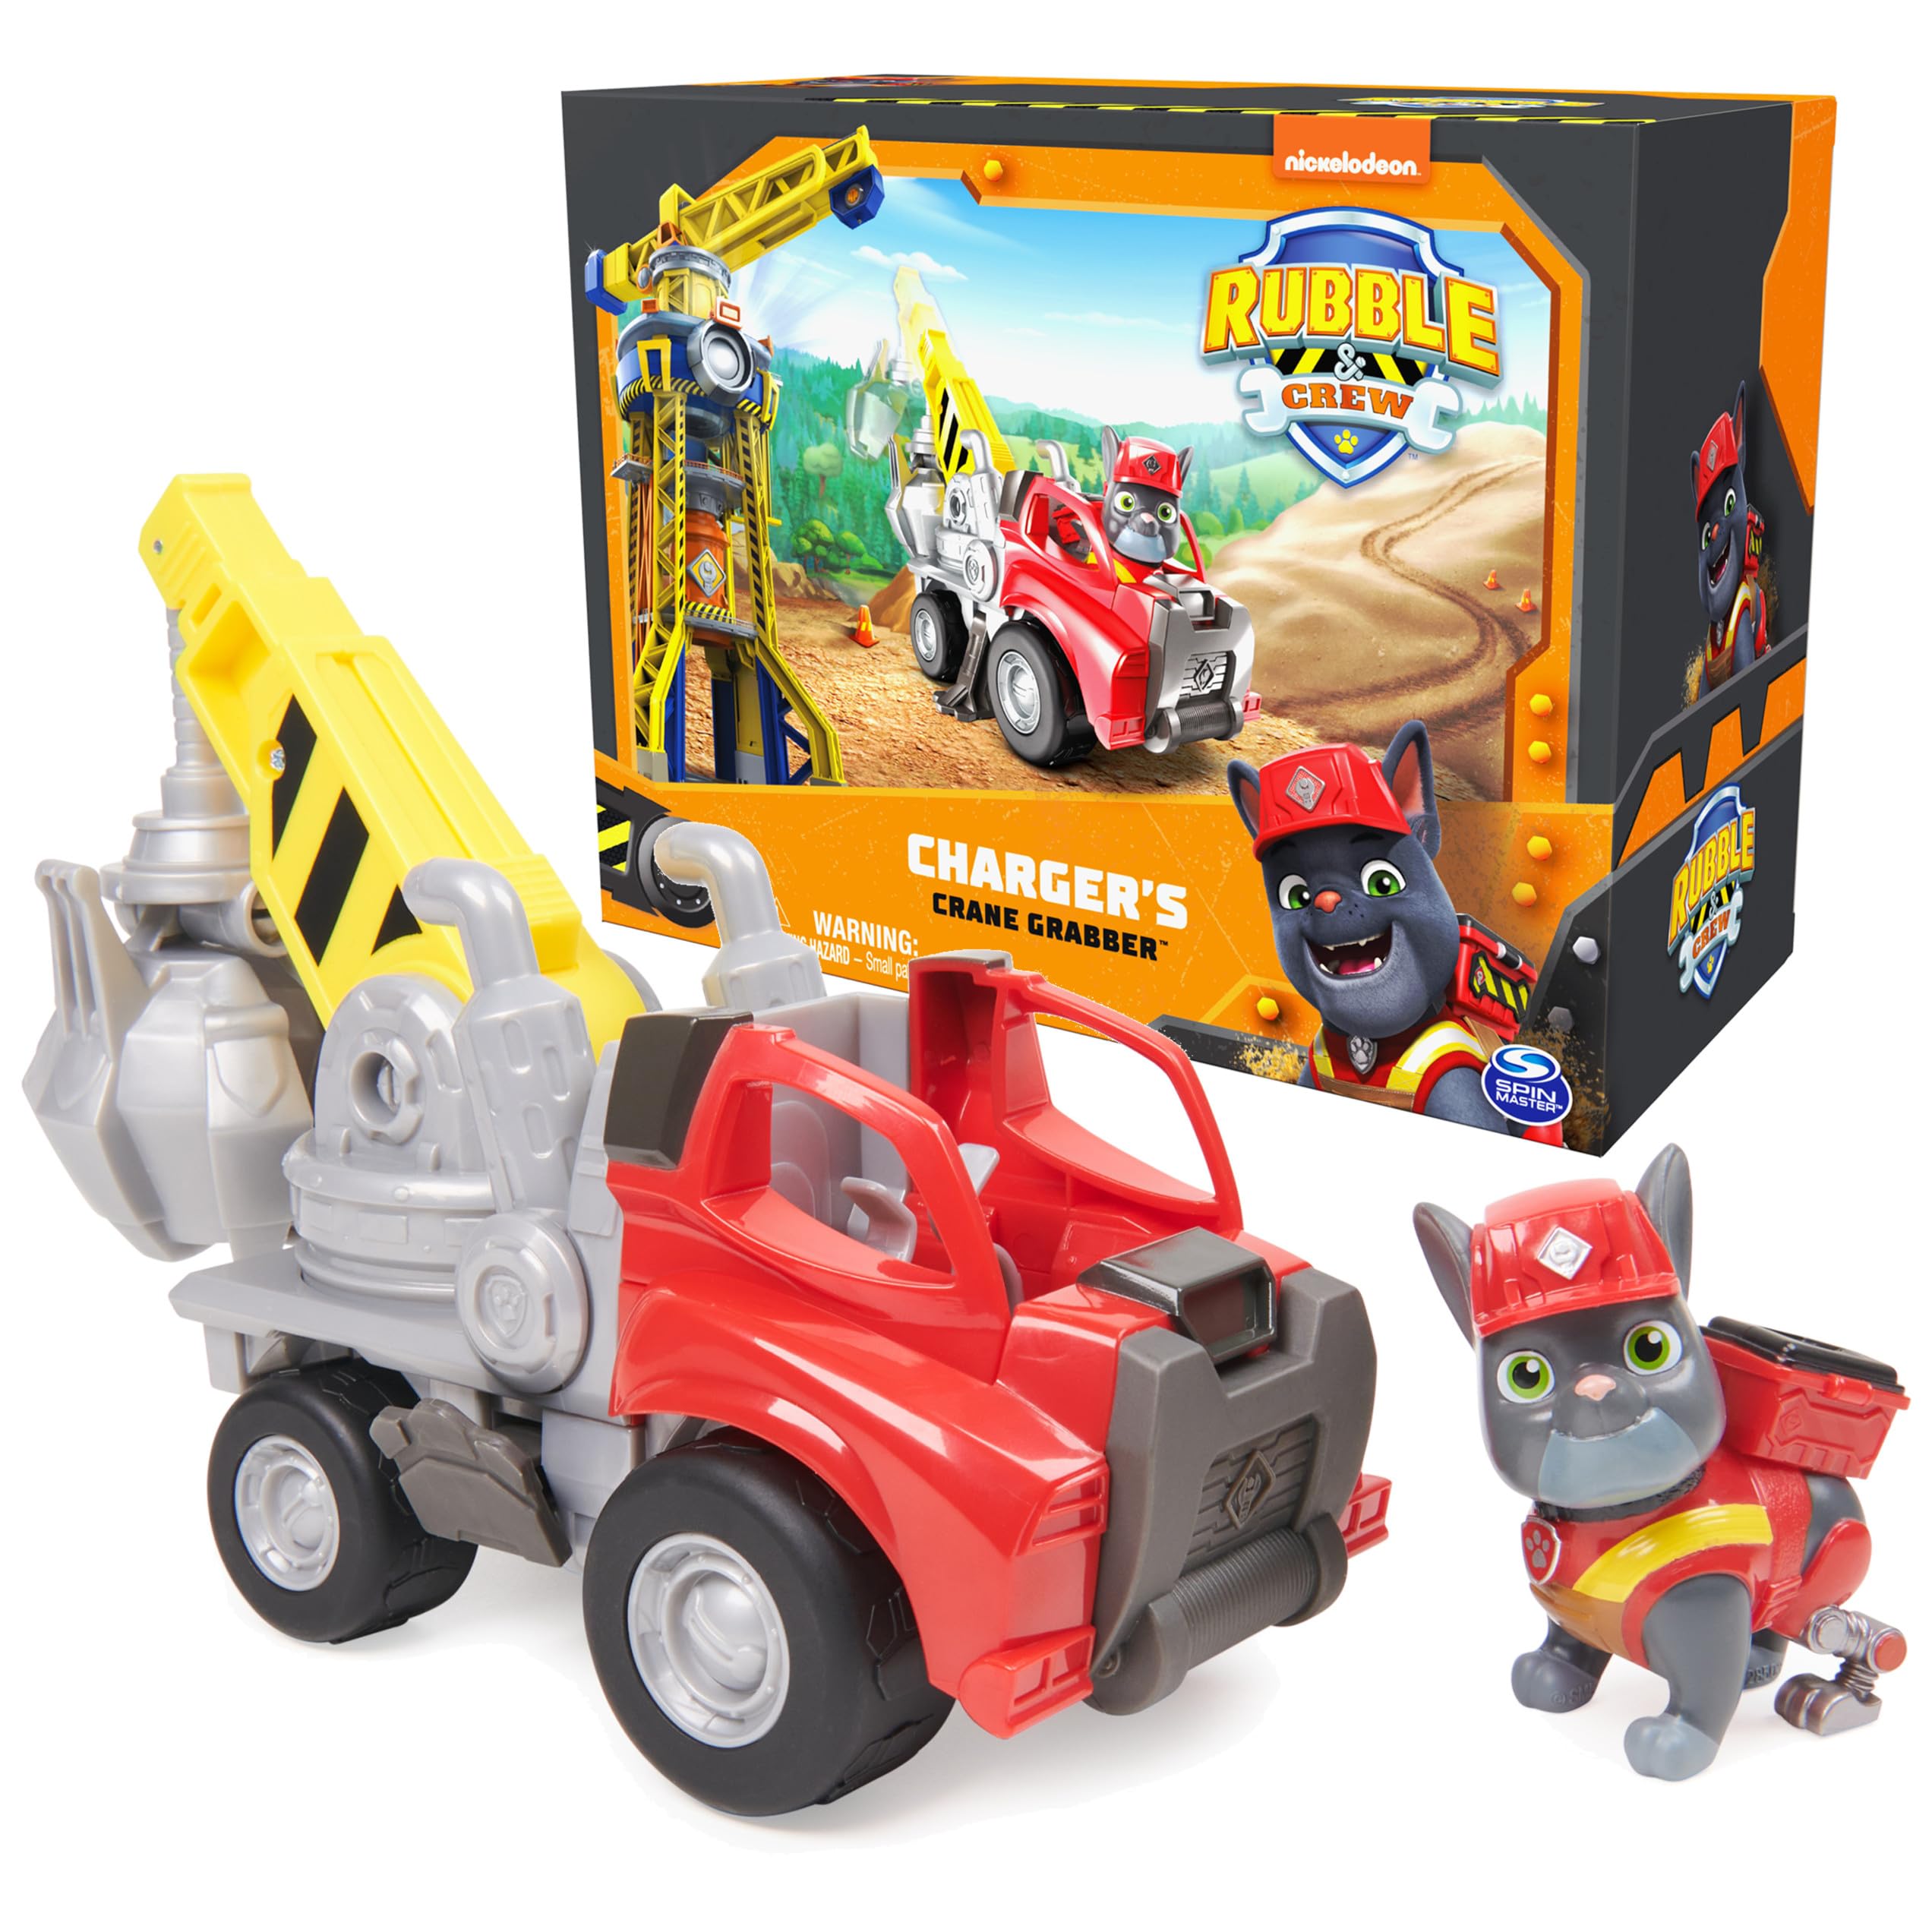 Rubble & Crew, Charger’s Crane Grabber Toy Truck with Movable Parts and a Collectible Action Figure, Kids Toys for Ages 3 and Up